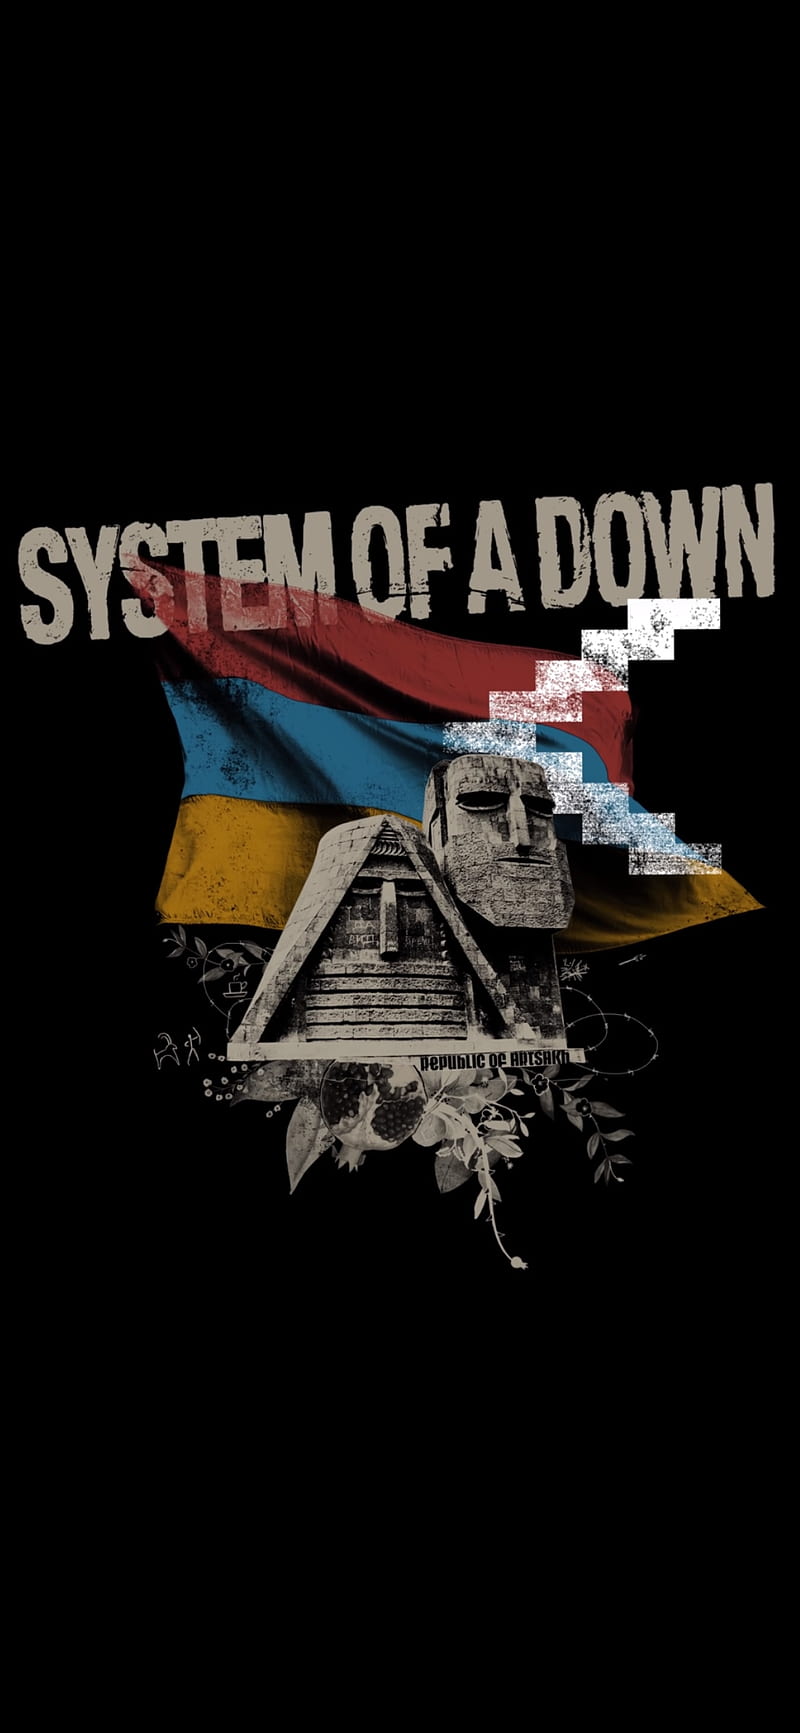 77 System Of A Down Wallpapers  WallpaperSafari